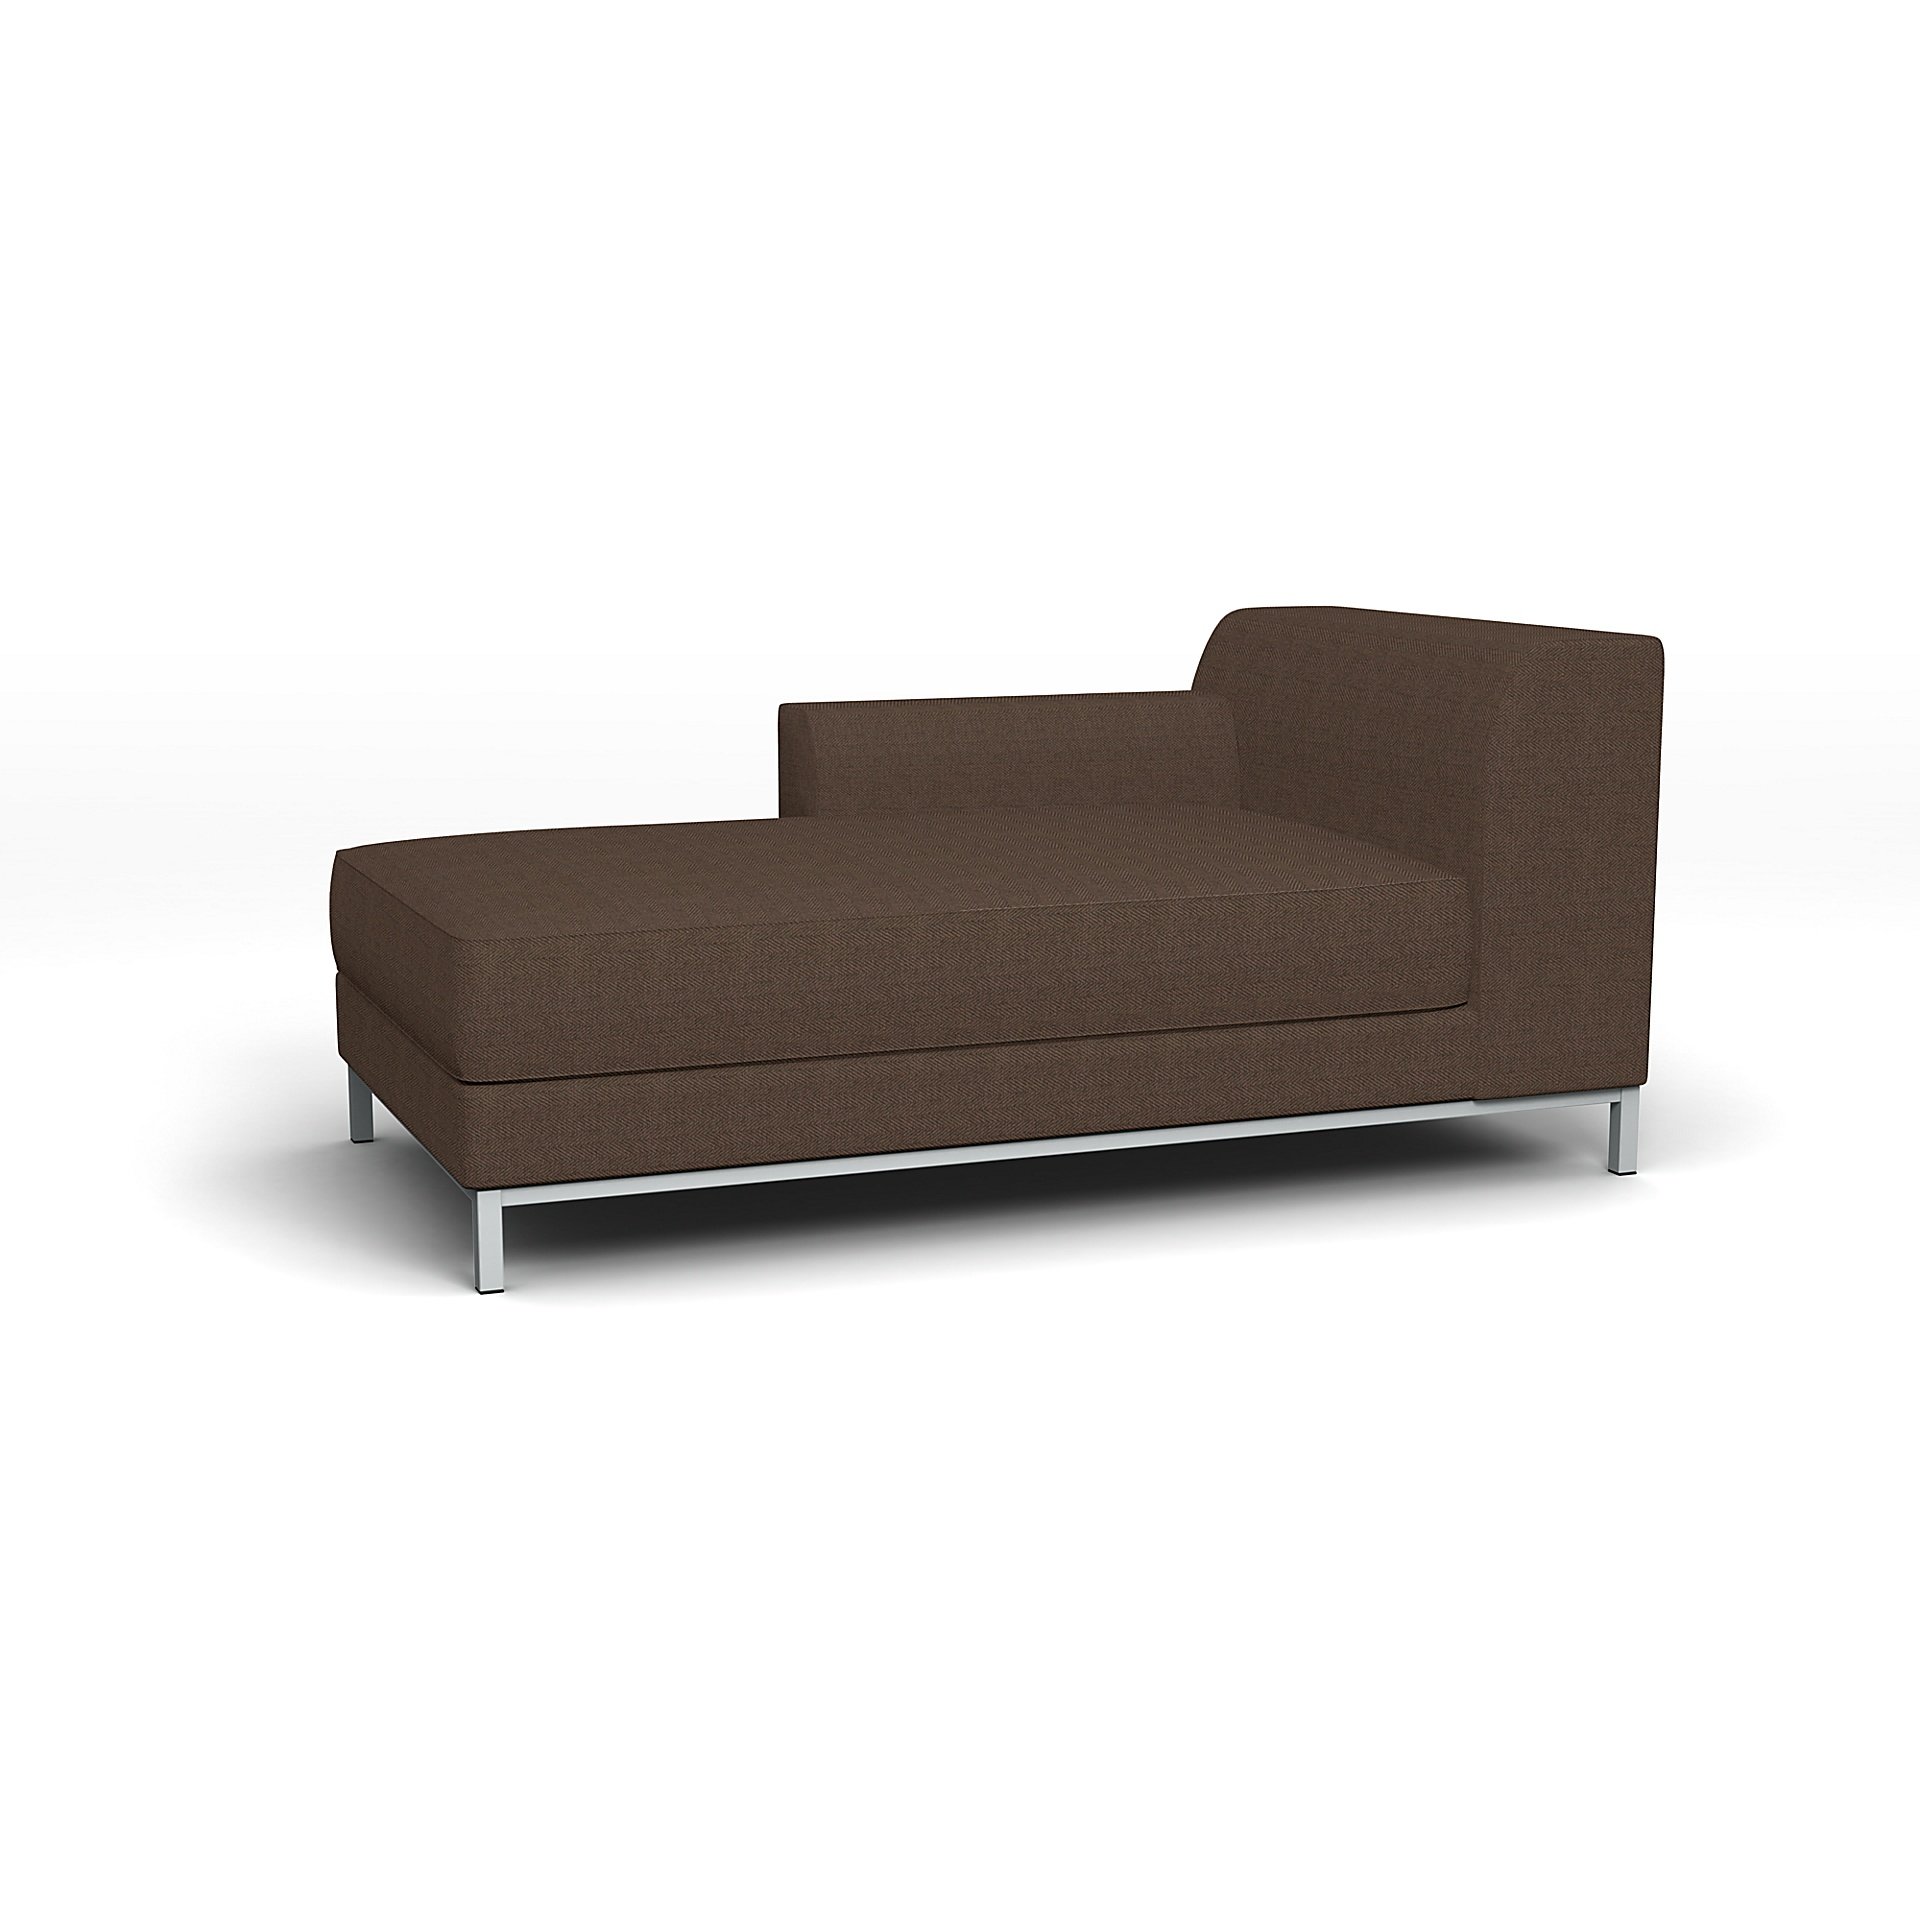 IKEA - Kramfors Chaise Longue with Left Arm Cover, Chocolate, Boucle & Texture - Bemz